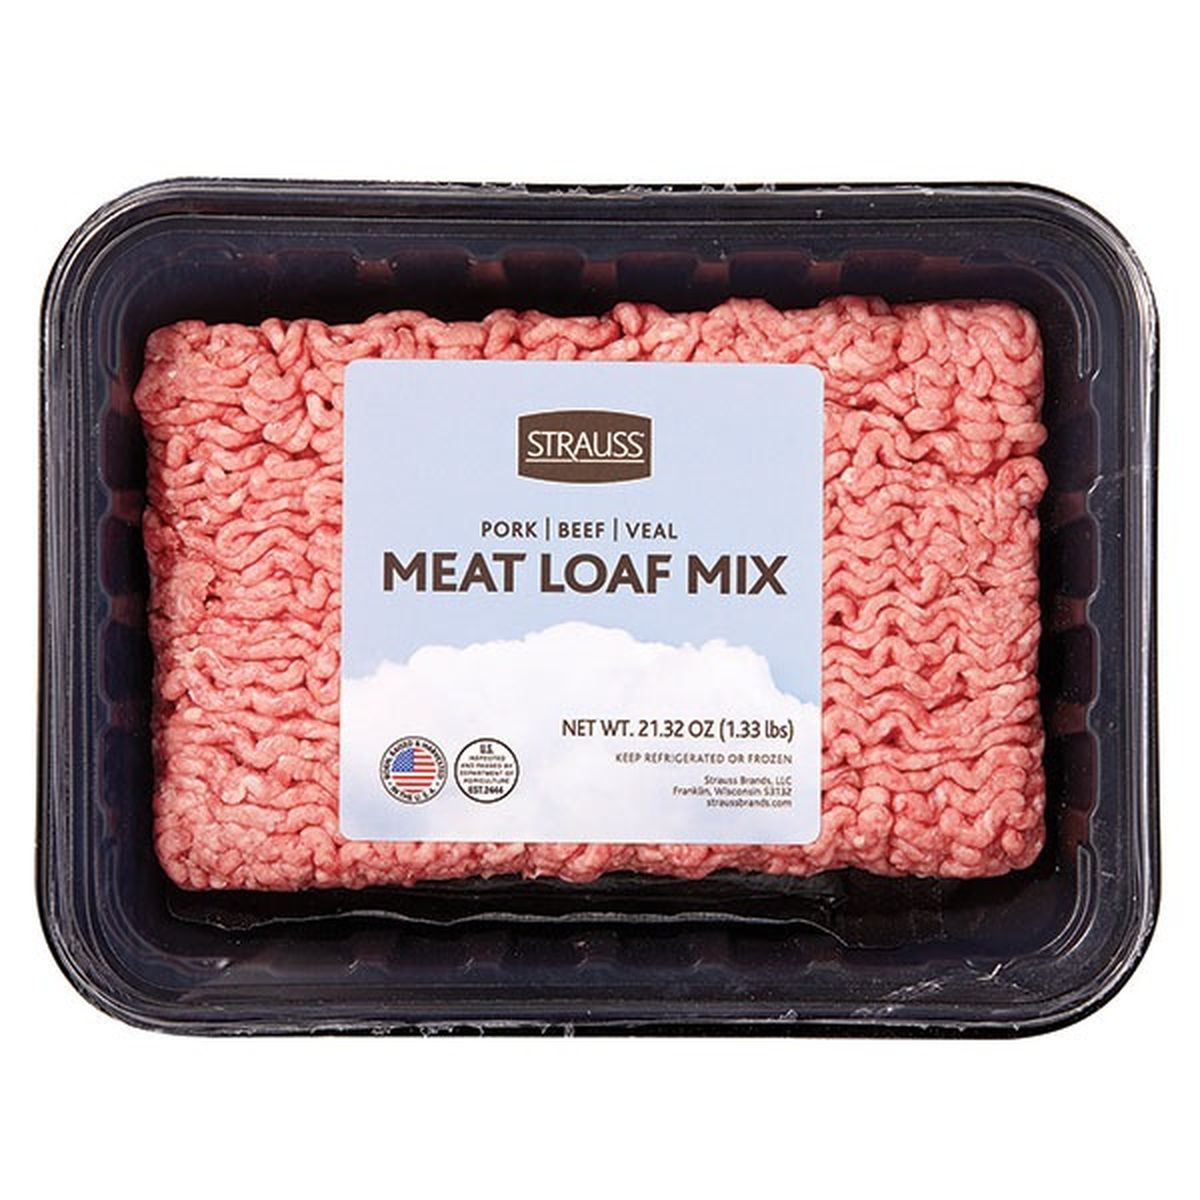 Calories in Meatloaf Mix